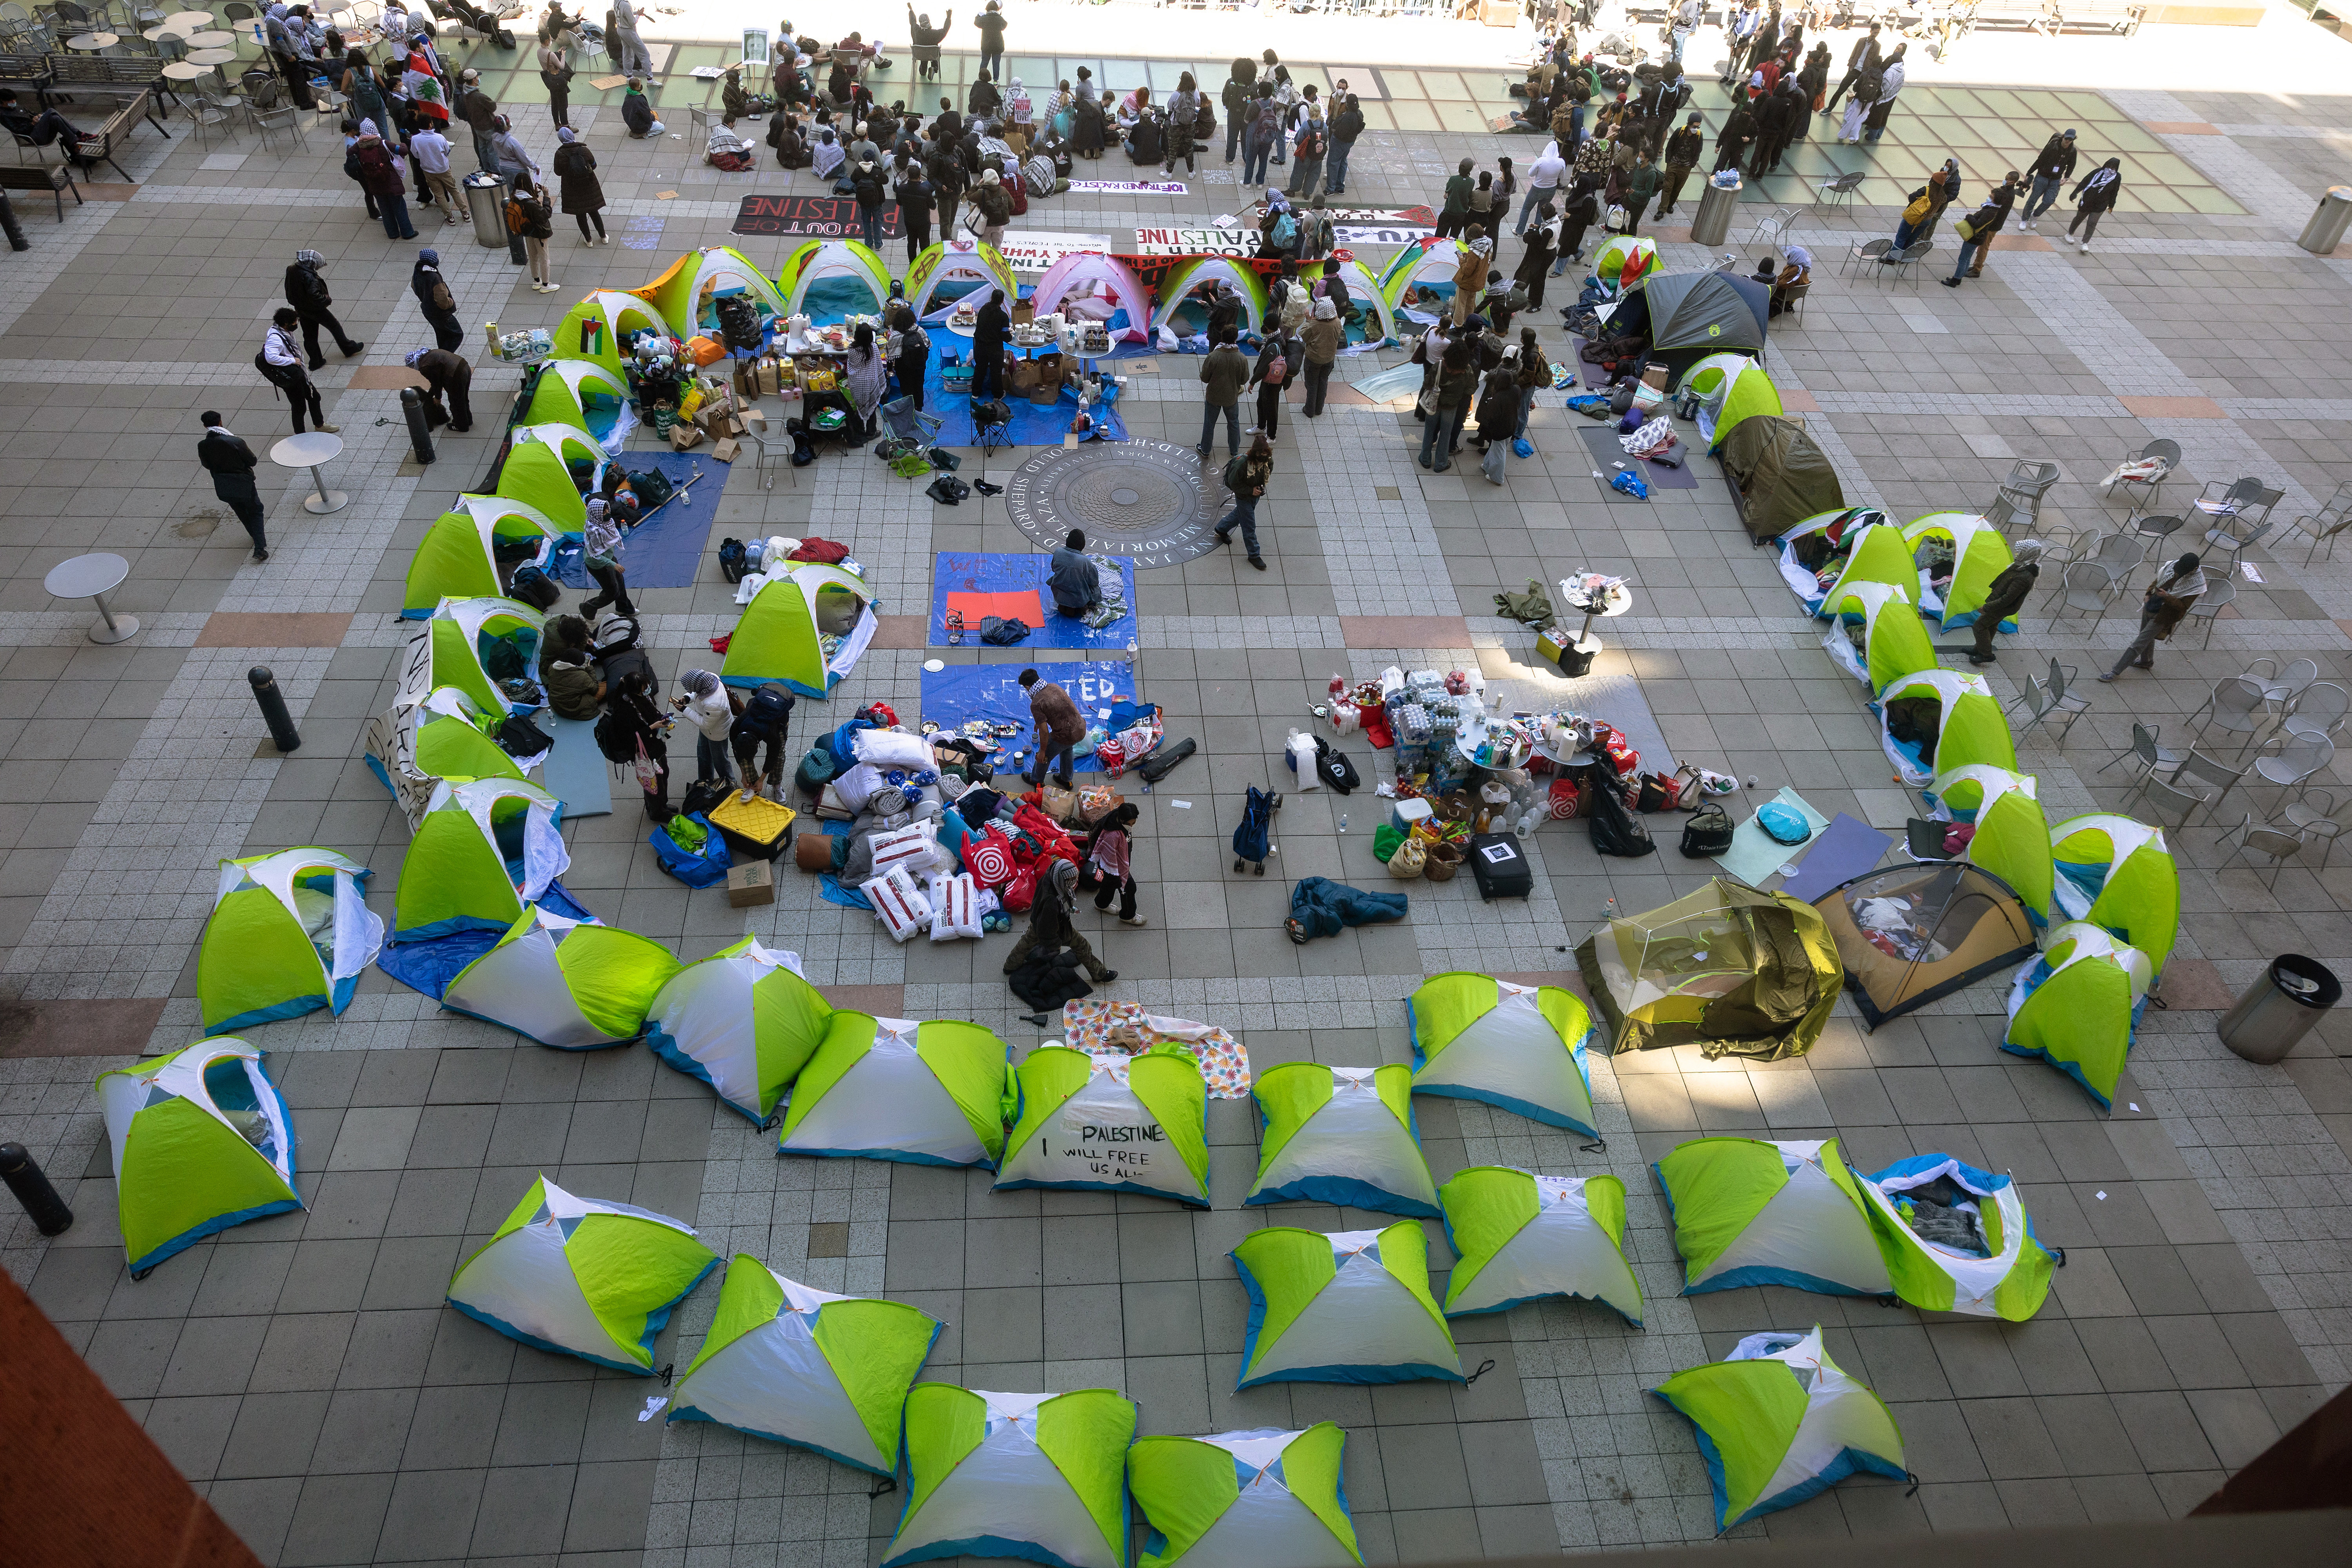 Aerial view of a public outdoor lounging area with arranged bean bags and small groups of people